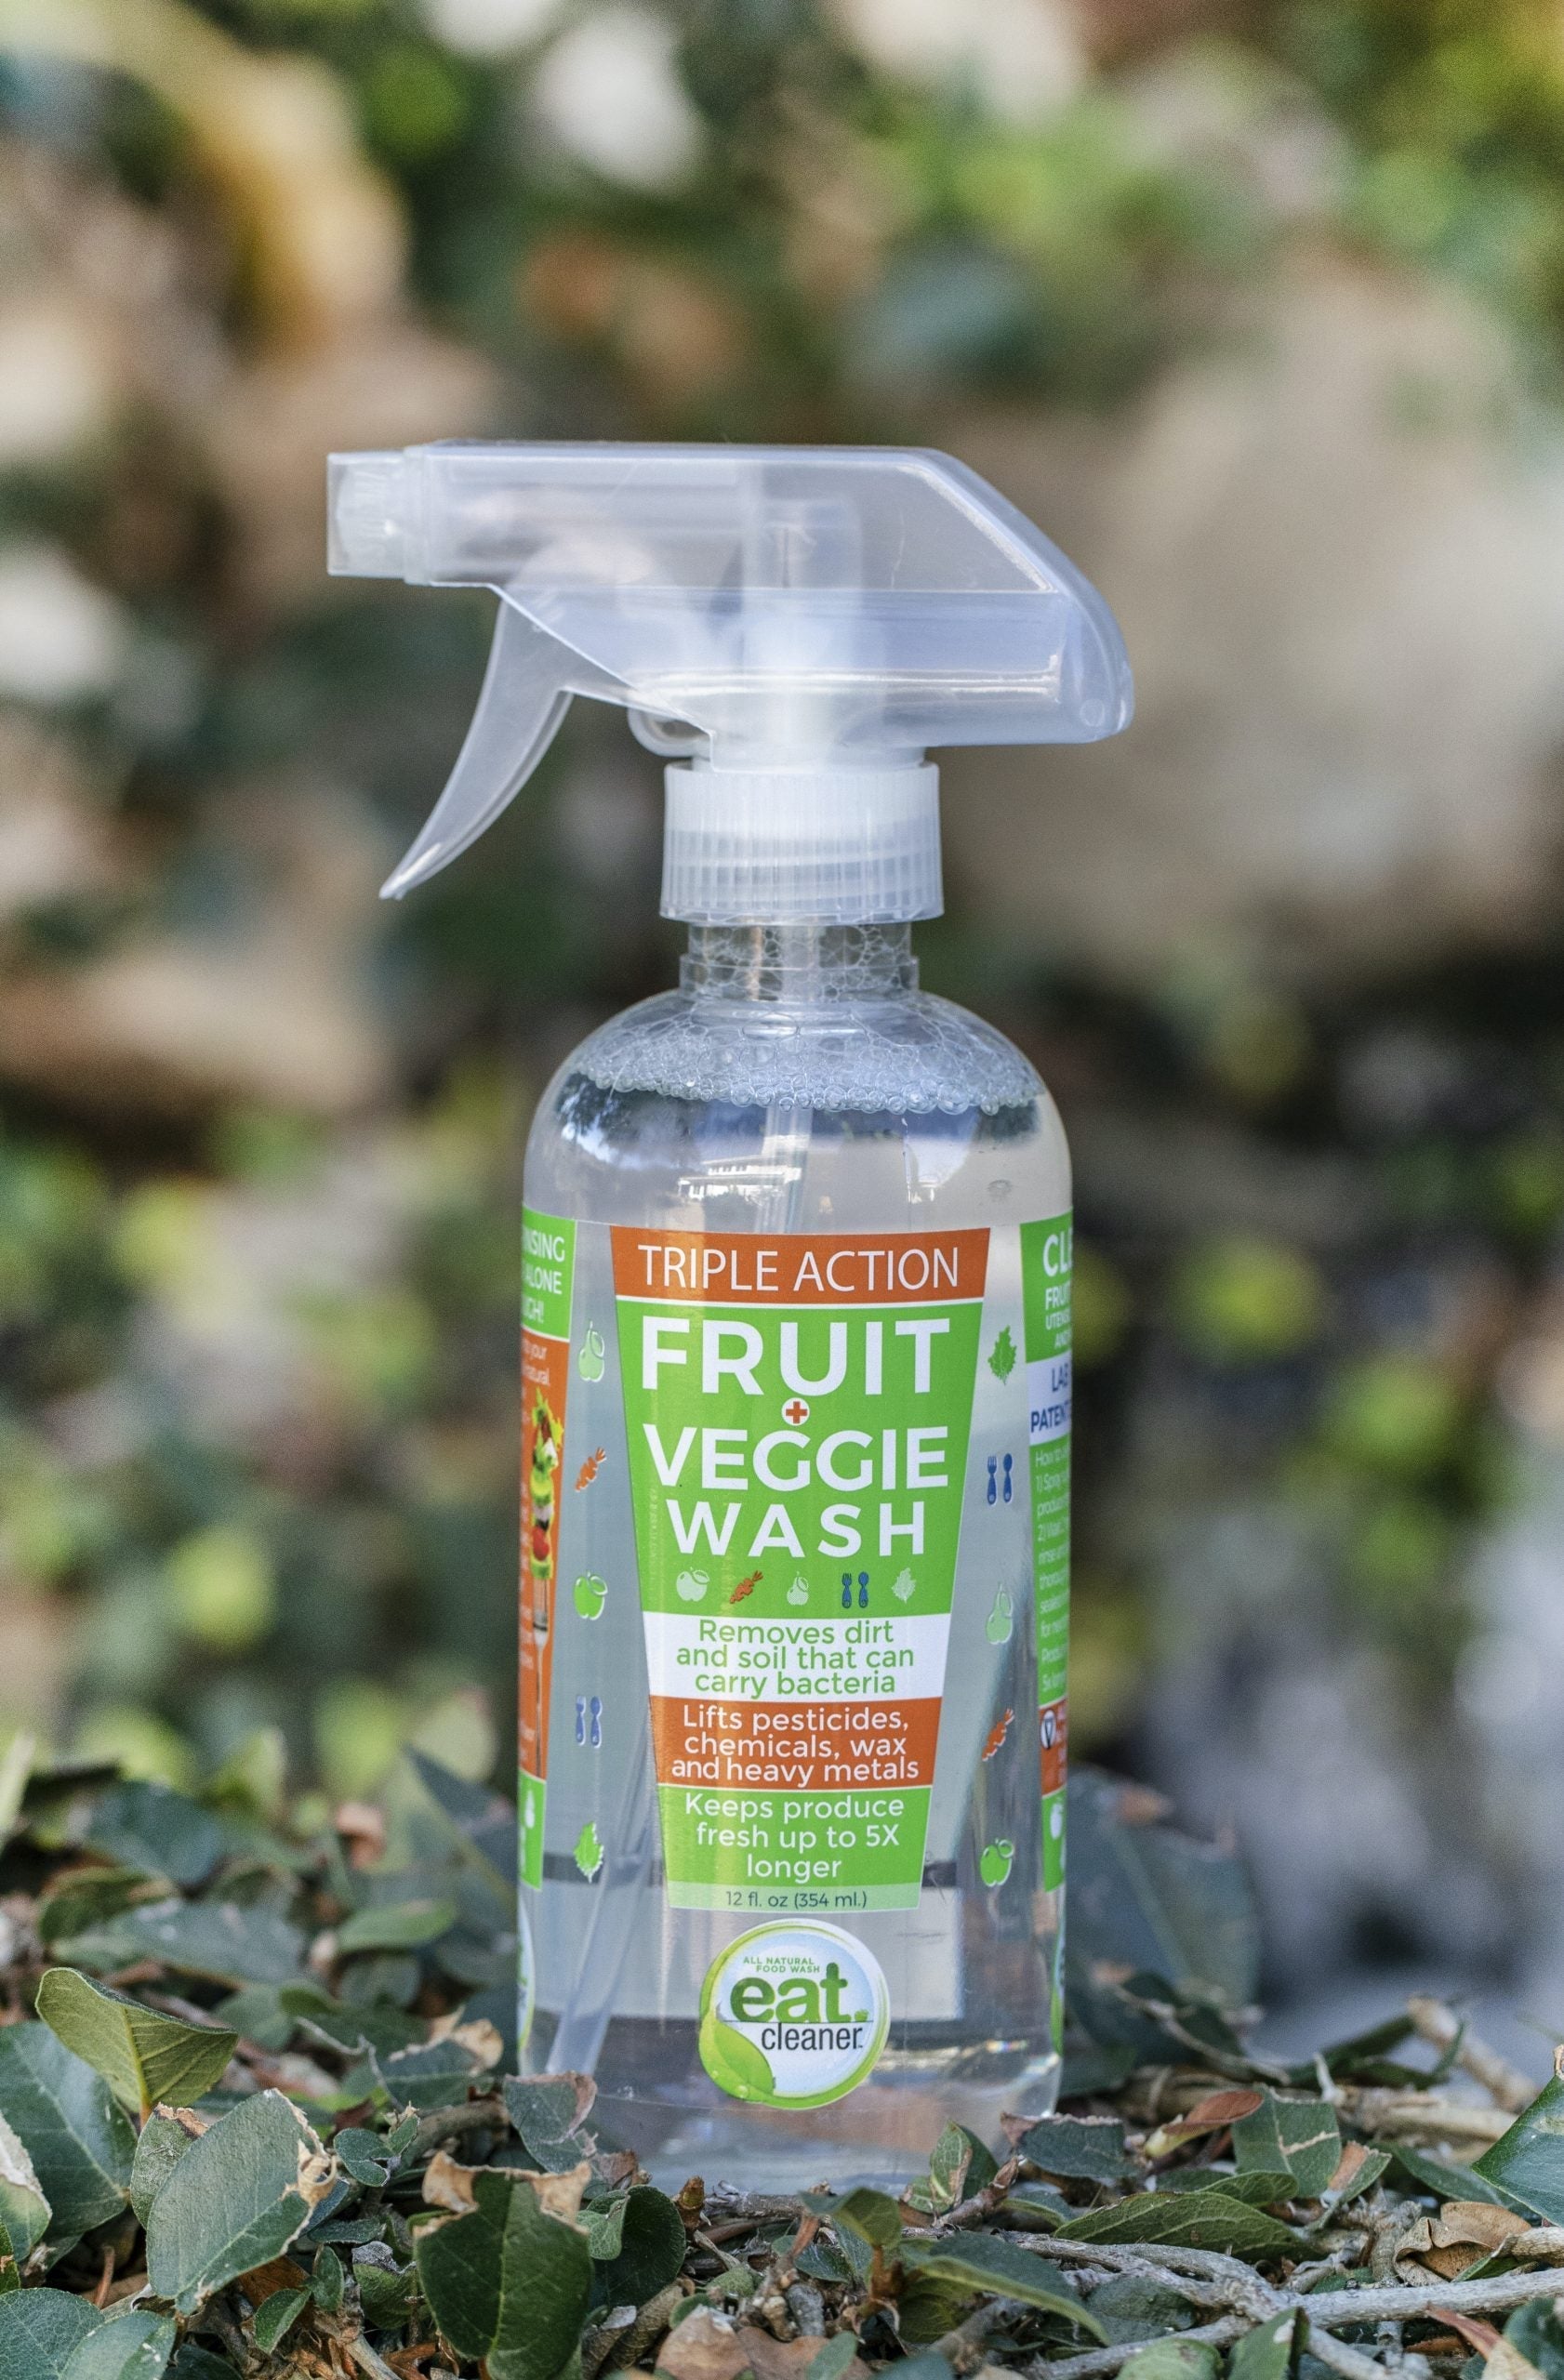 Triple Action Fruit and Veggie Wash